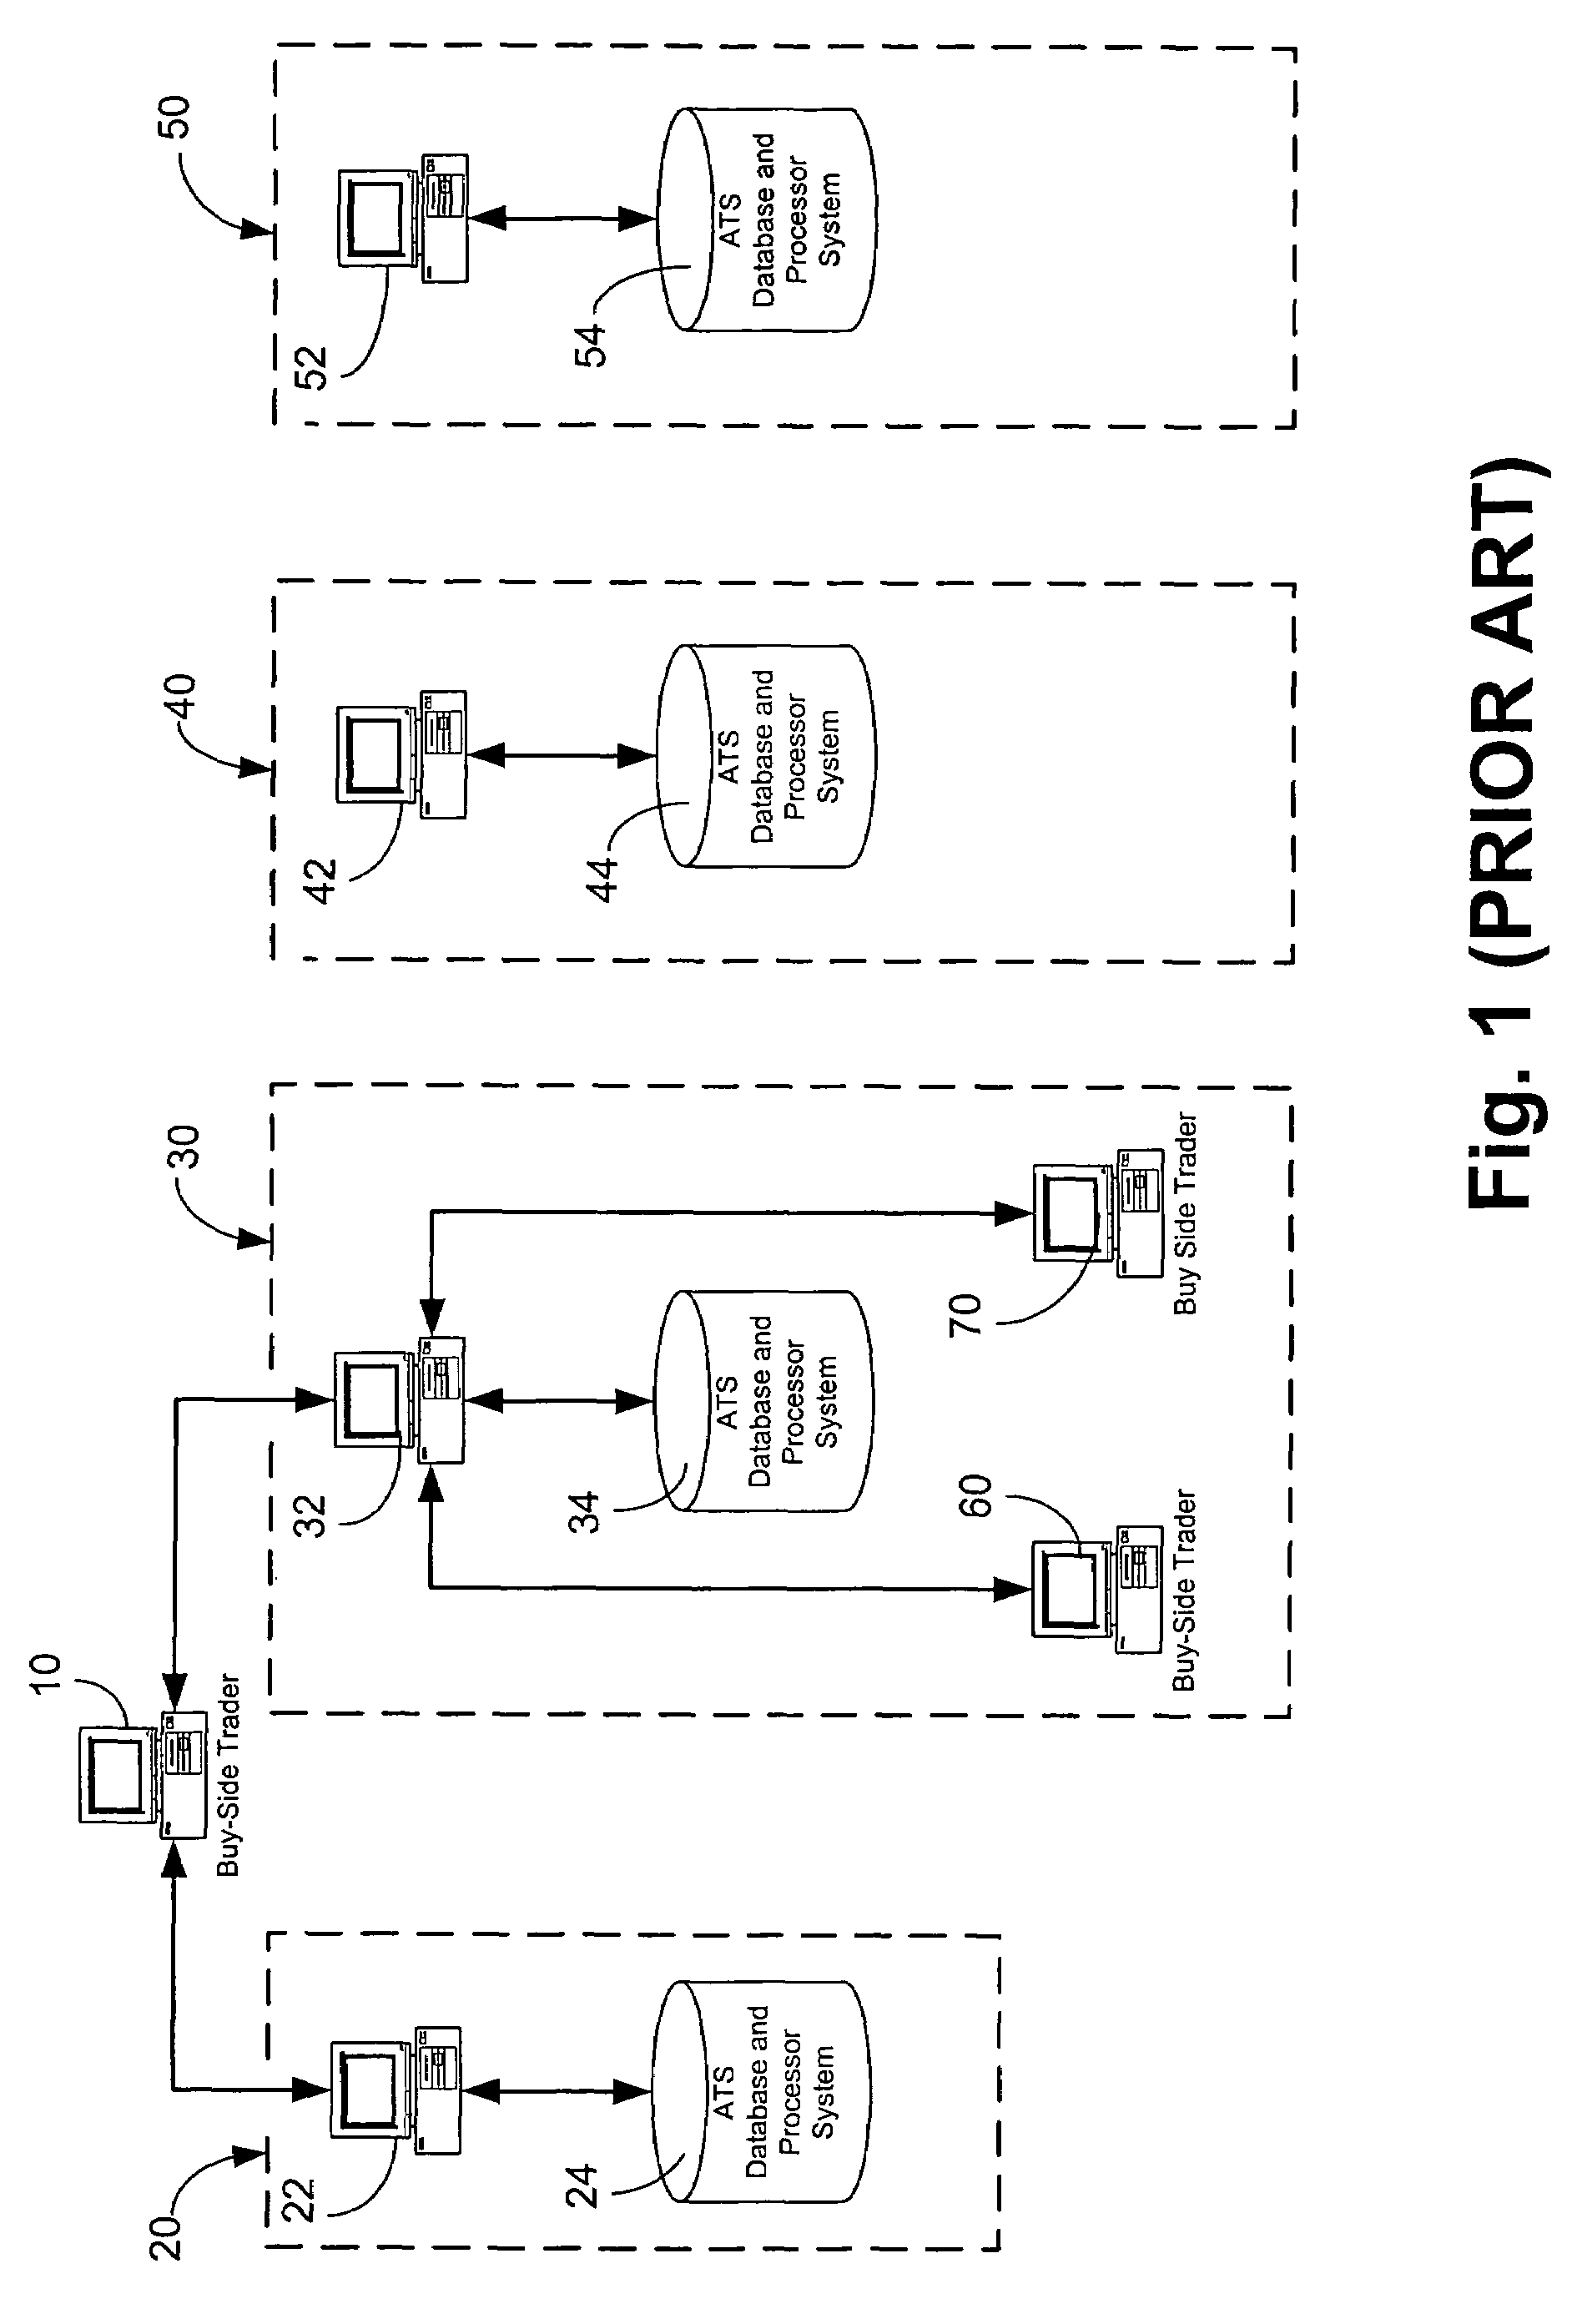 Method for providing aggregation of trading on multiple alternative trading systems